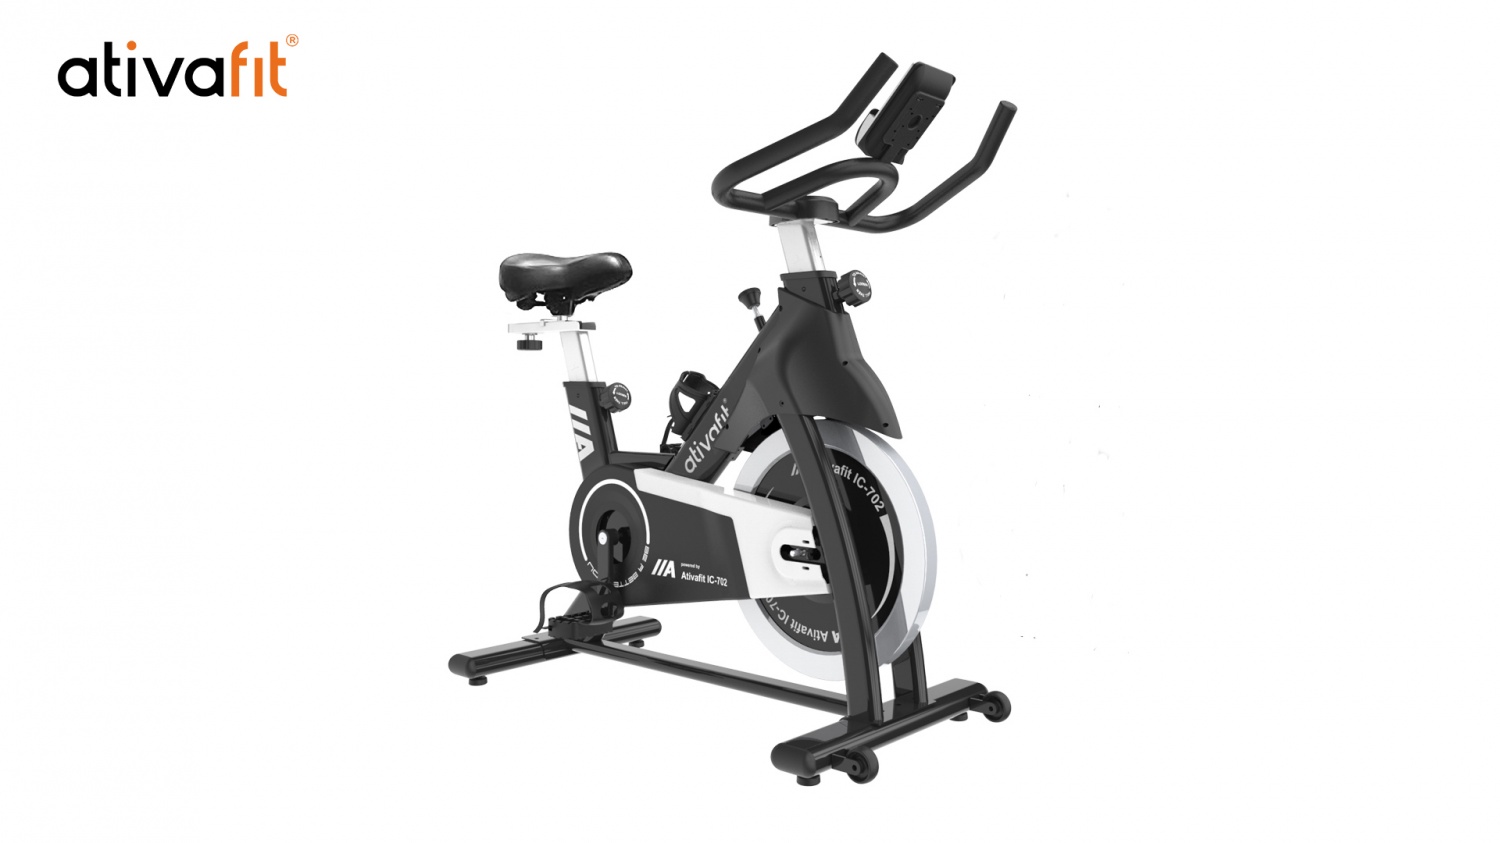 ATIVAFIT Adjustable Dumbbell, Exercise Bike Would Complete Your At-Home Gym in No Time! 